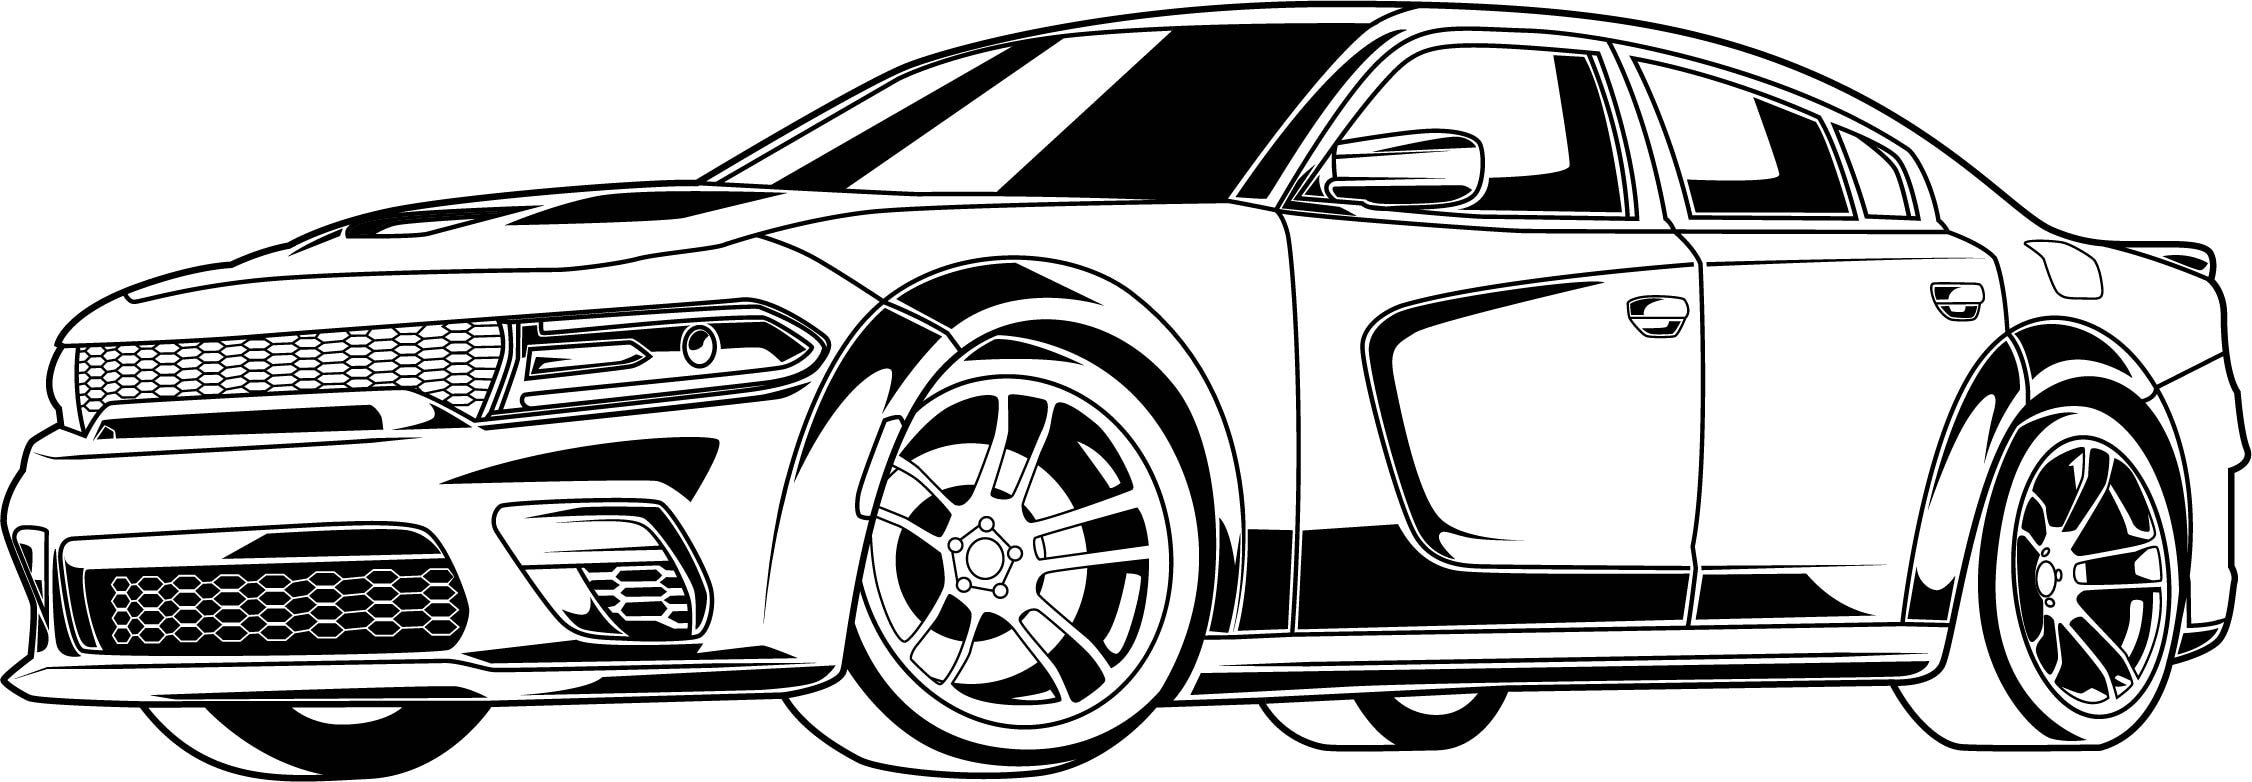 Muscle sports cars fast speed svg clipart supercar files for cricut and silhouette dxf png vector